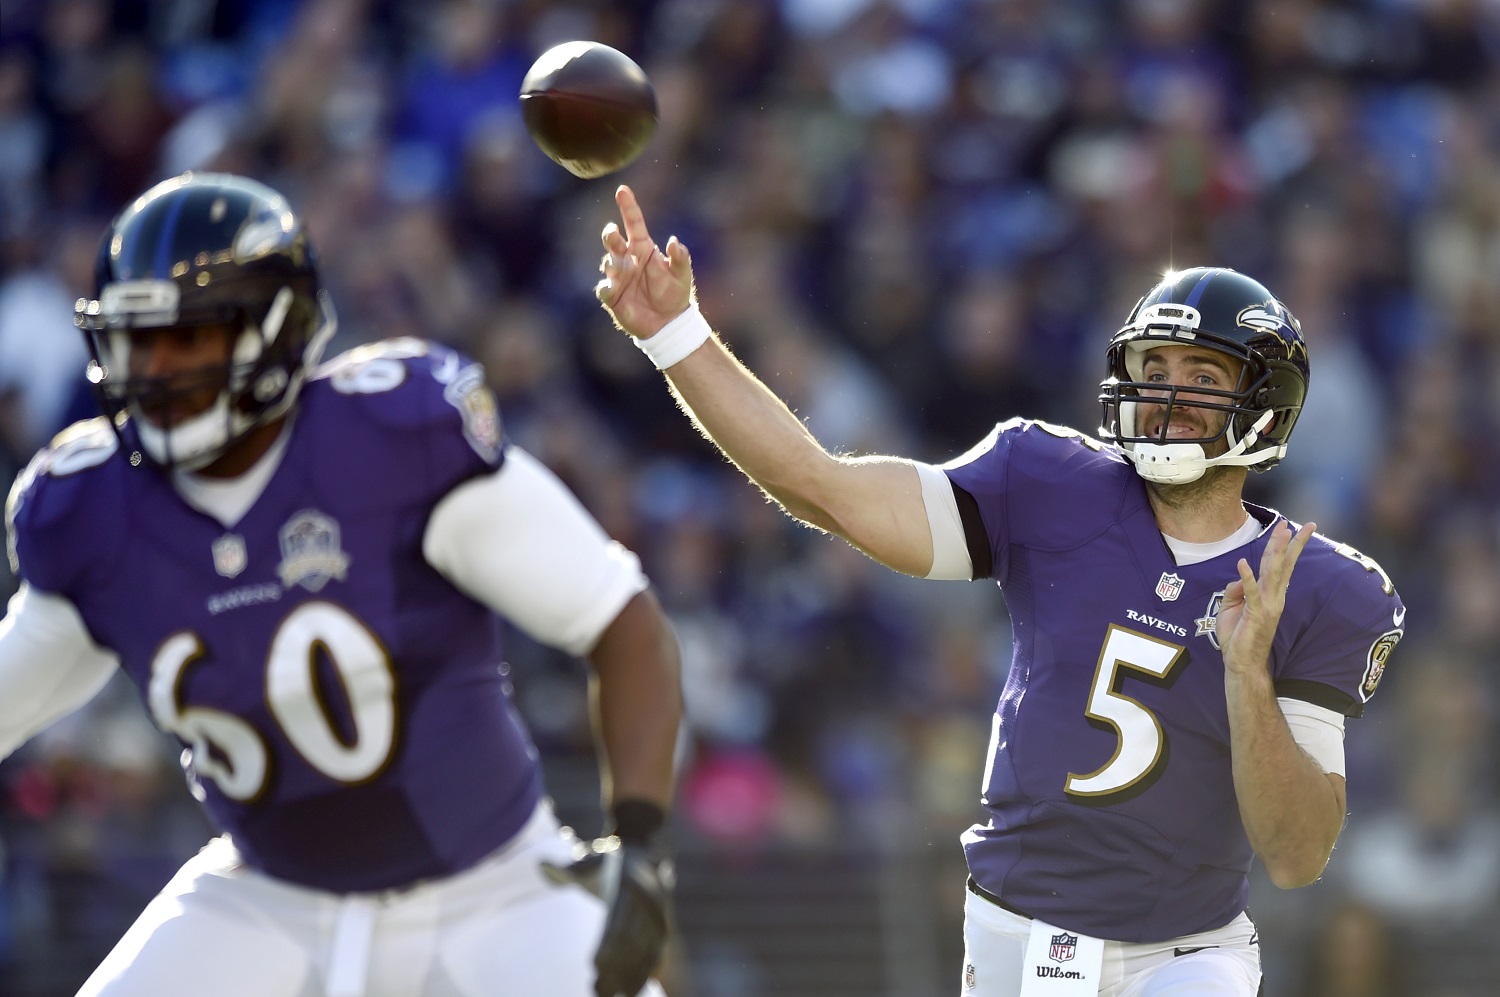 Baltimore Ravens quarterback Joe Flacco (5) throws to a receiver as he is protected by tackle Eugene Monroe in the first half an NFL football game against the Jacksonville Jaguars, Sunday, Nov. 15, 2015, in Baltimore. (AP Photo/Gail Burton)